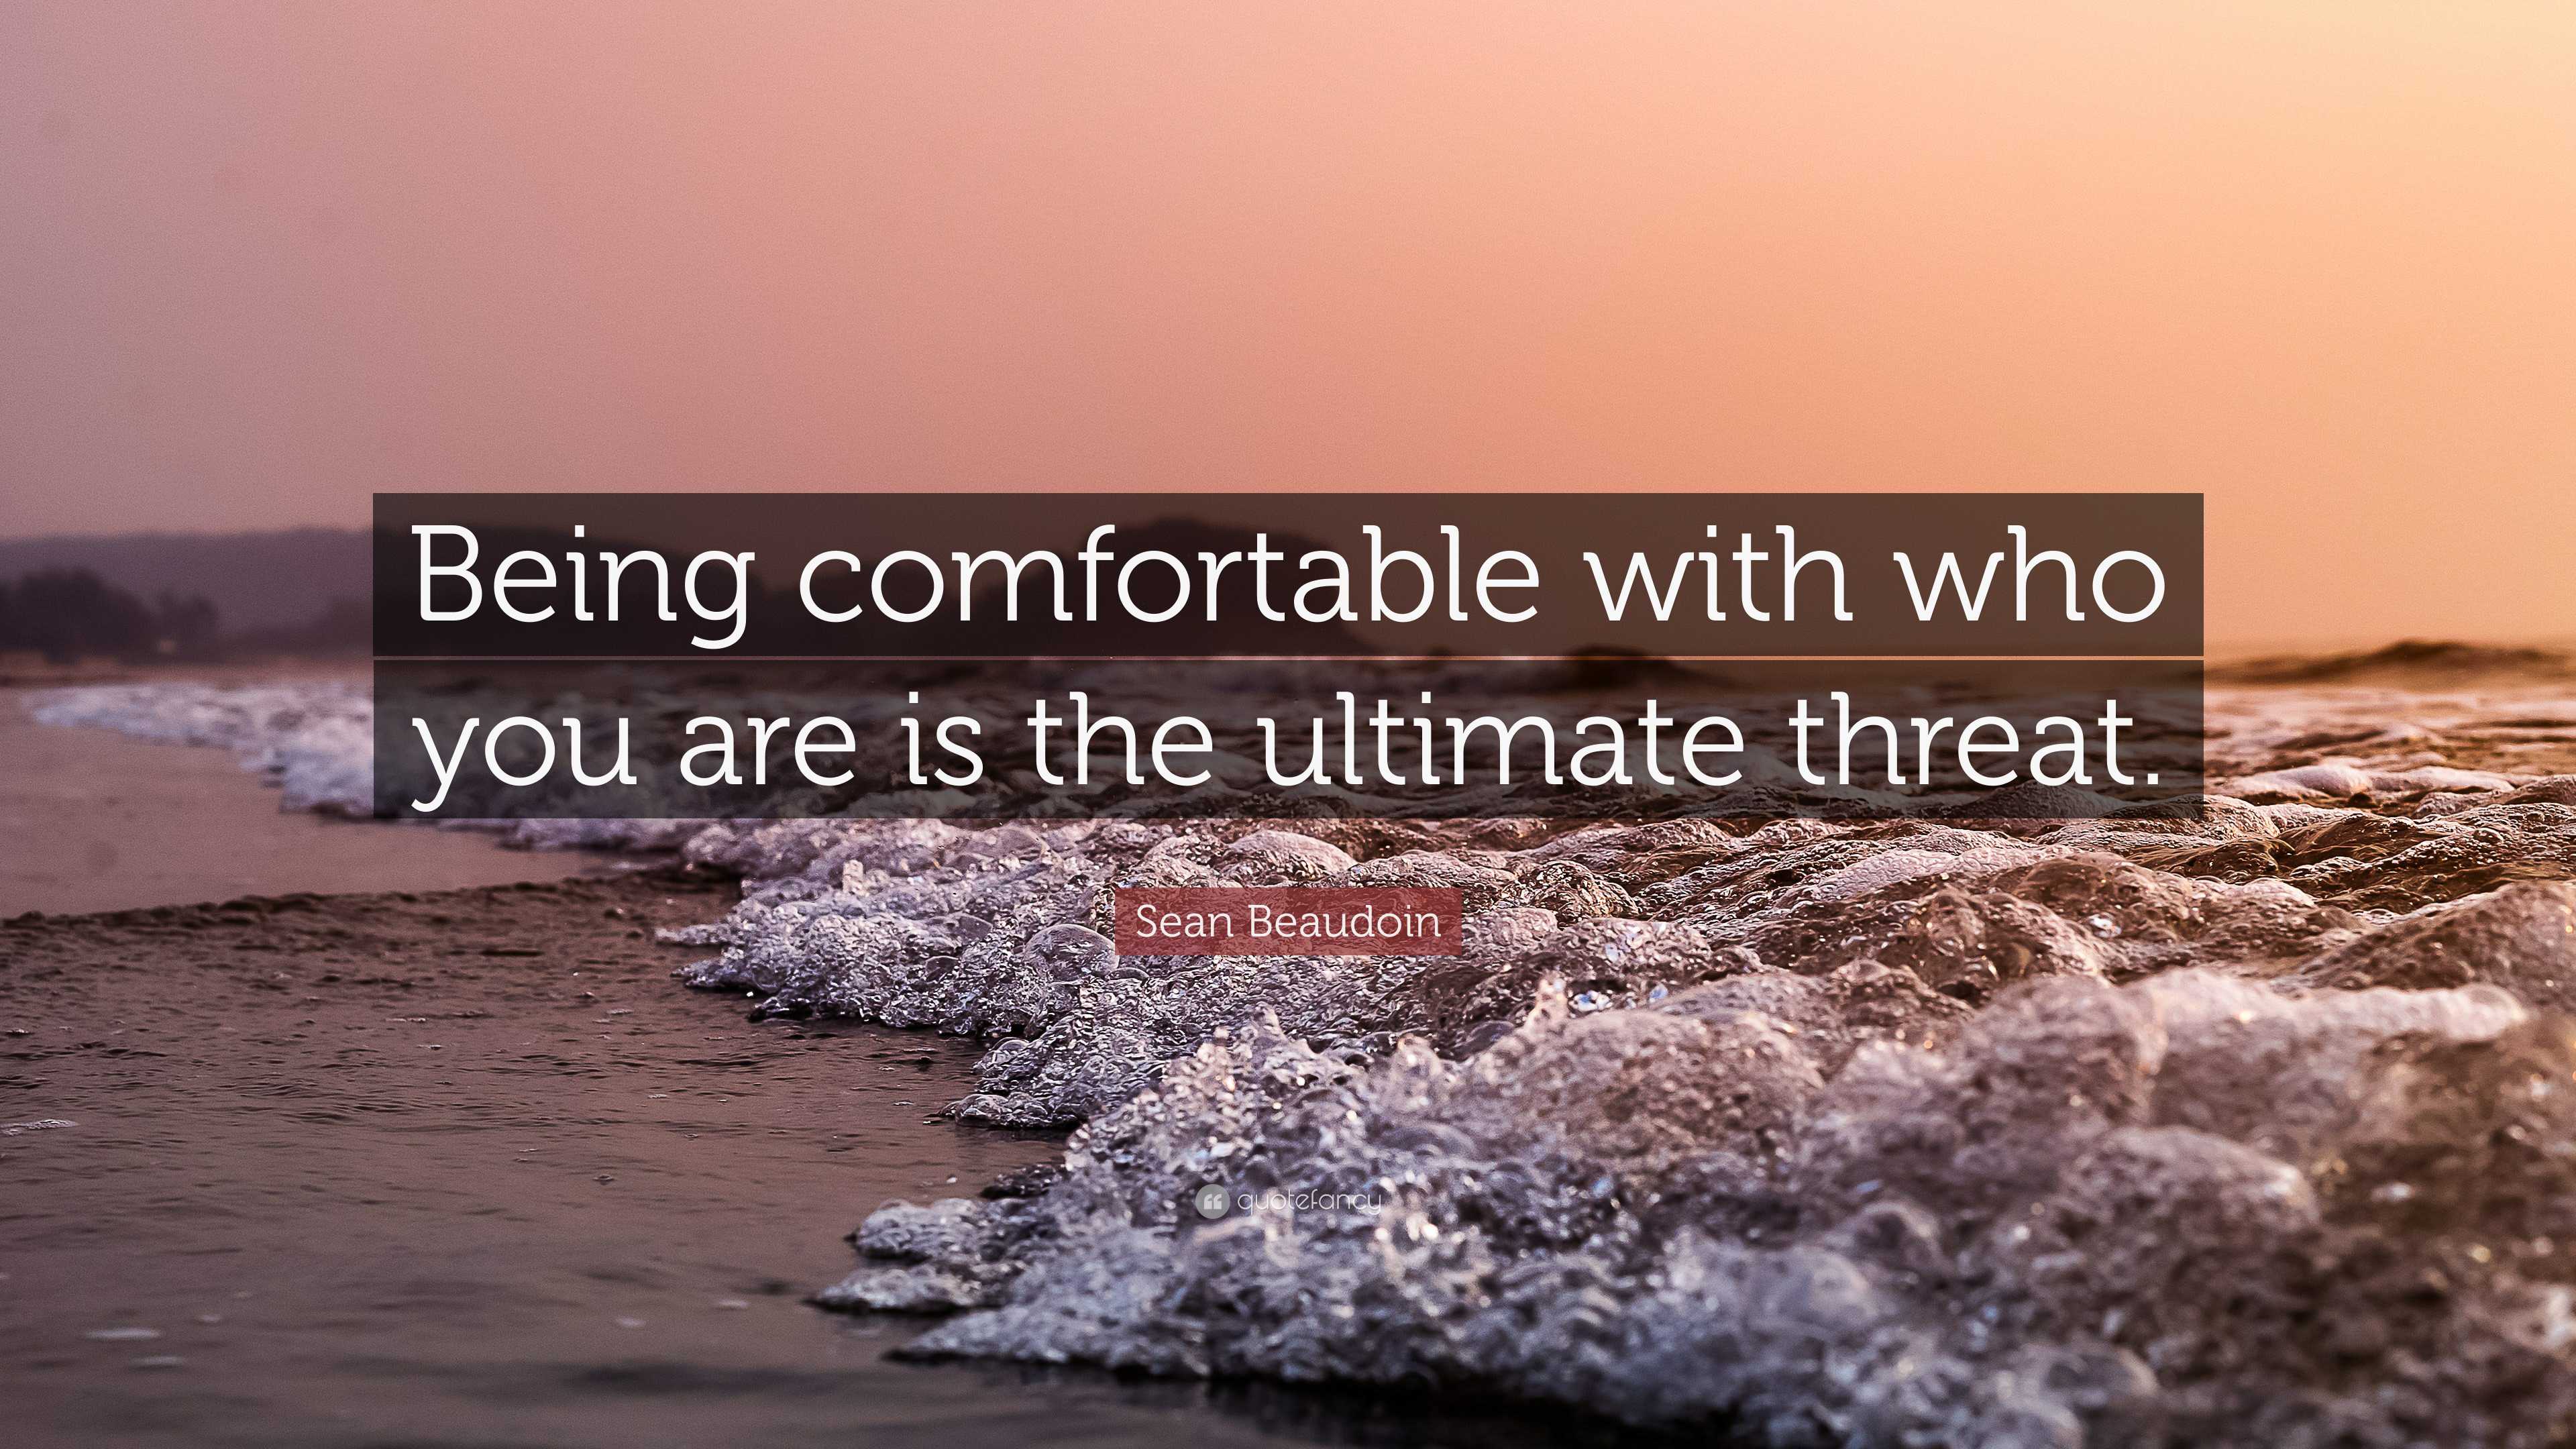 Sean Beaudoin Quote: “Being comfortable with who you are is the